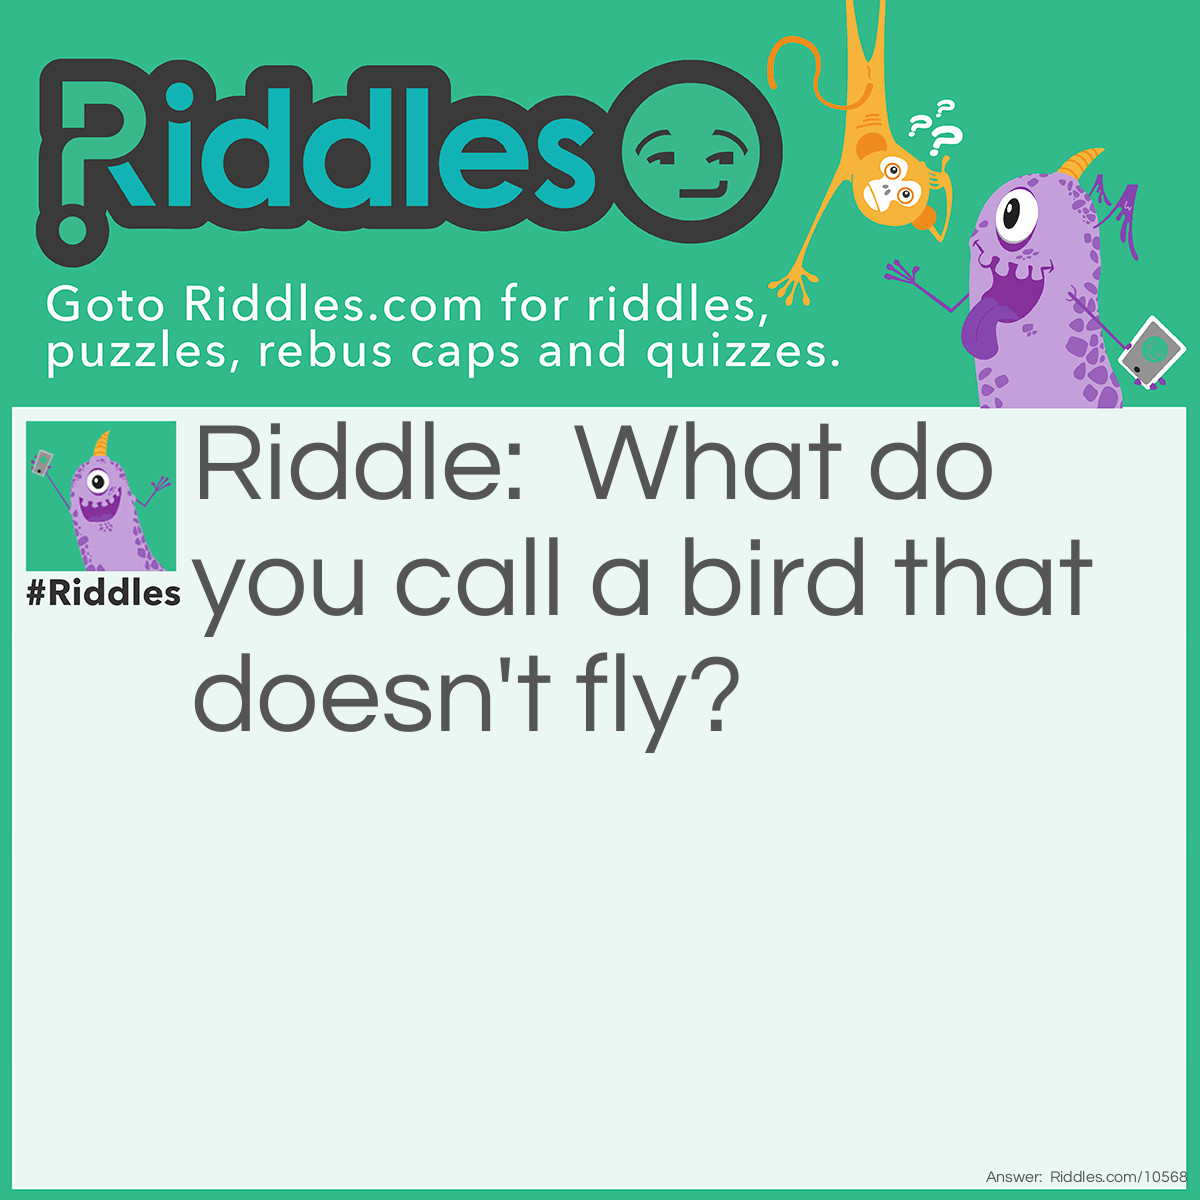 Riddle: What do you call a bird that doesn't fly? Answer: A grounded bird.